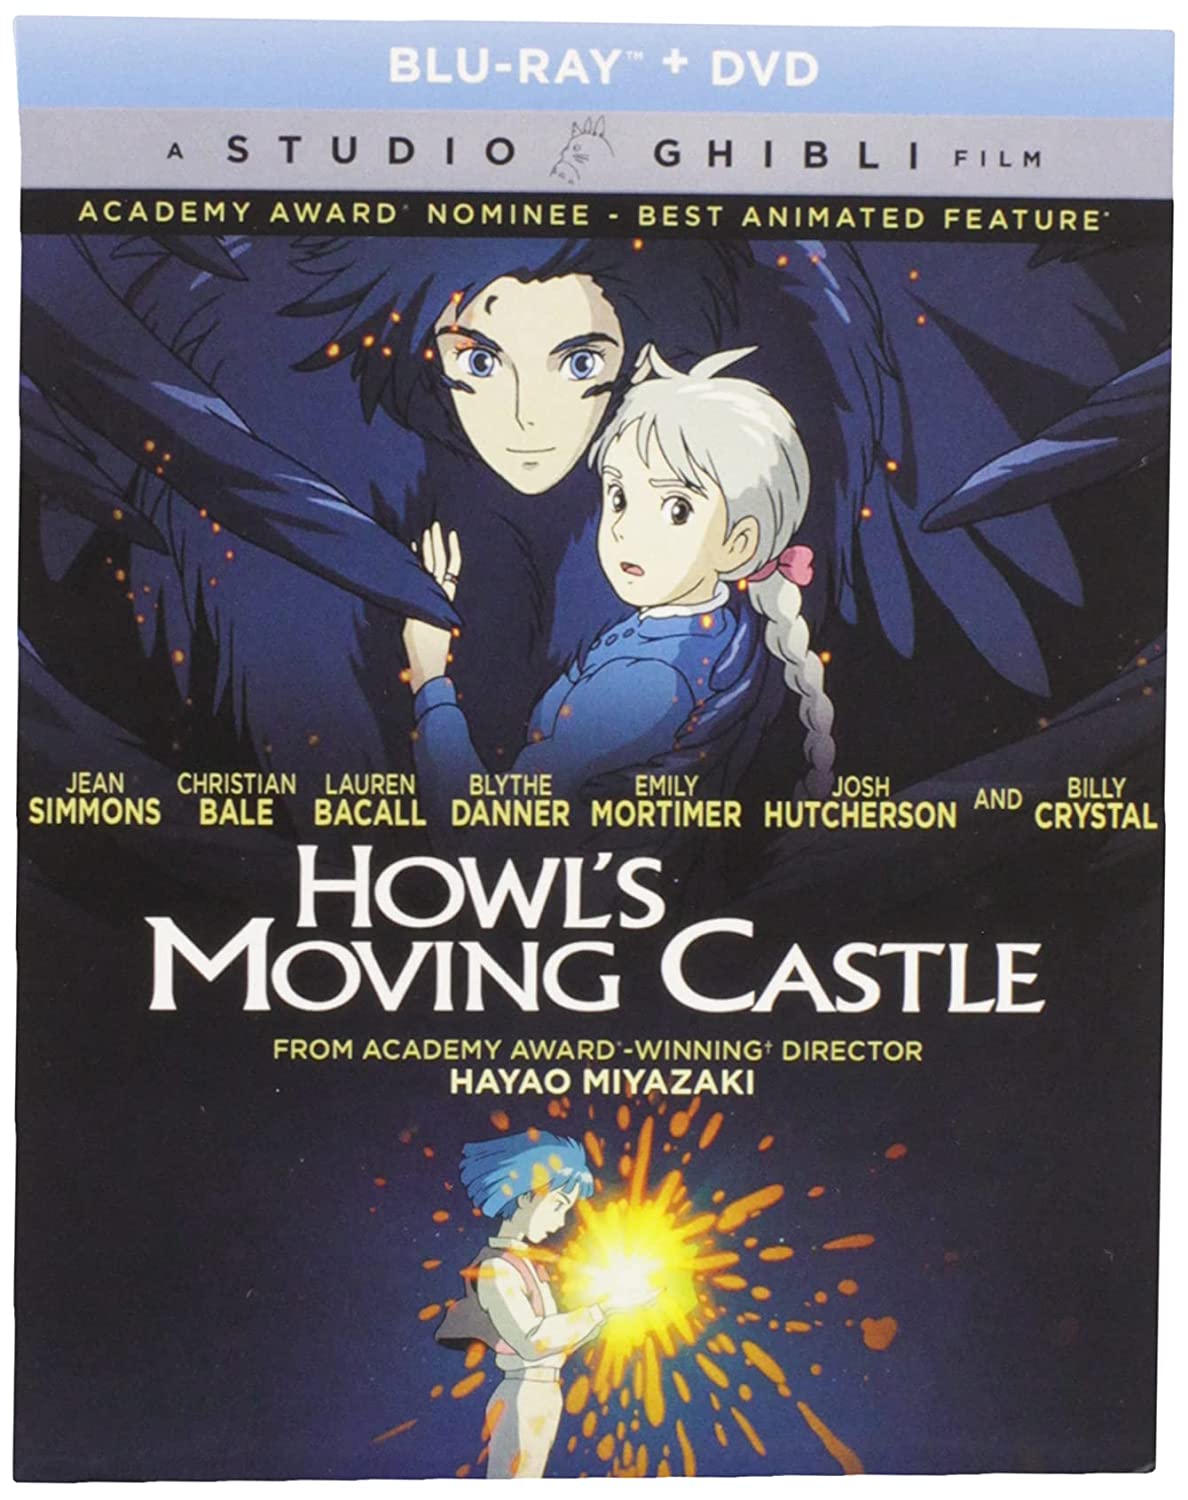 Studio Ghibli (Blu-ray + DVD): Howl's Moving Castle + My Neighbor Totoro + Kiki's Delivery Service $30 or $26.45 w/ REDcard + Free Shipping @ Target